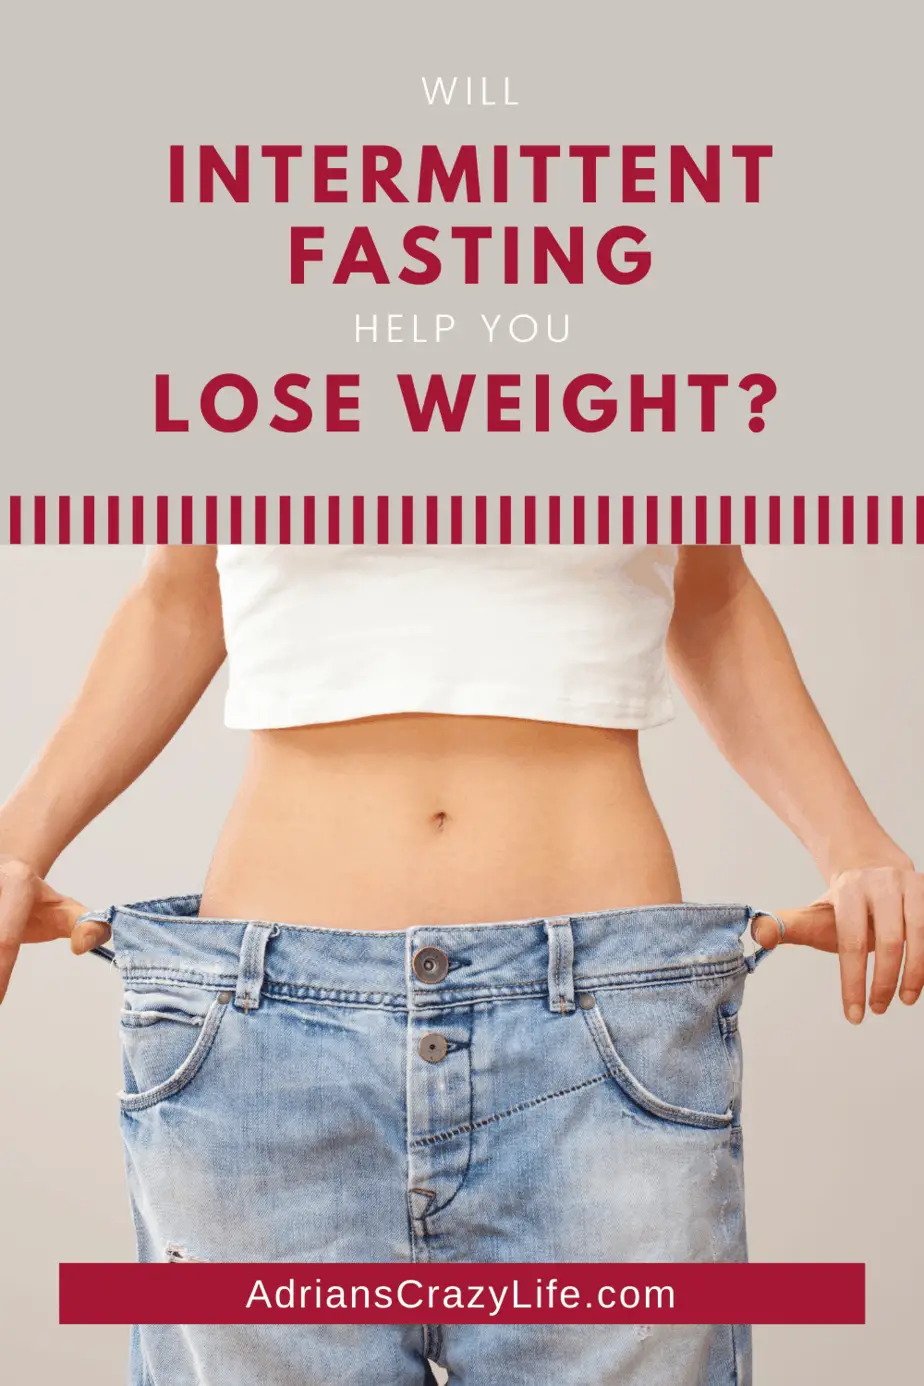 Will Intermittent Fasting Help You Lose Weight?